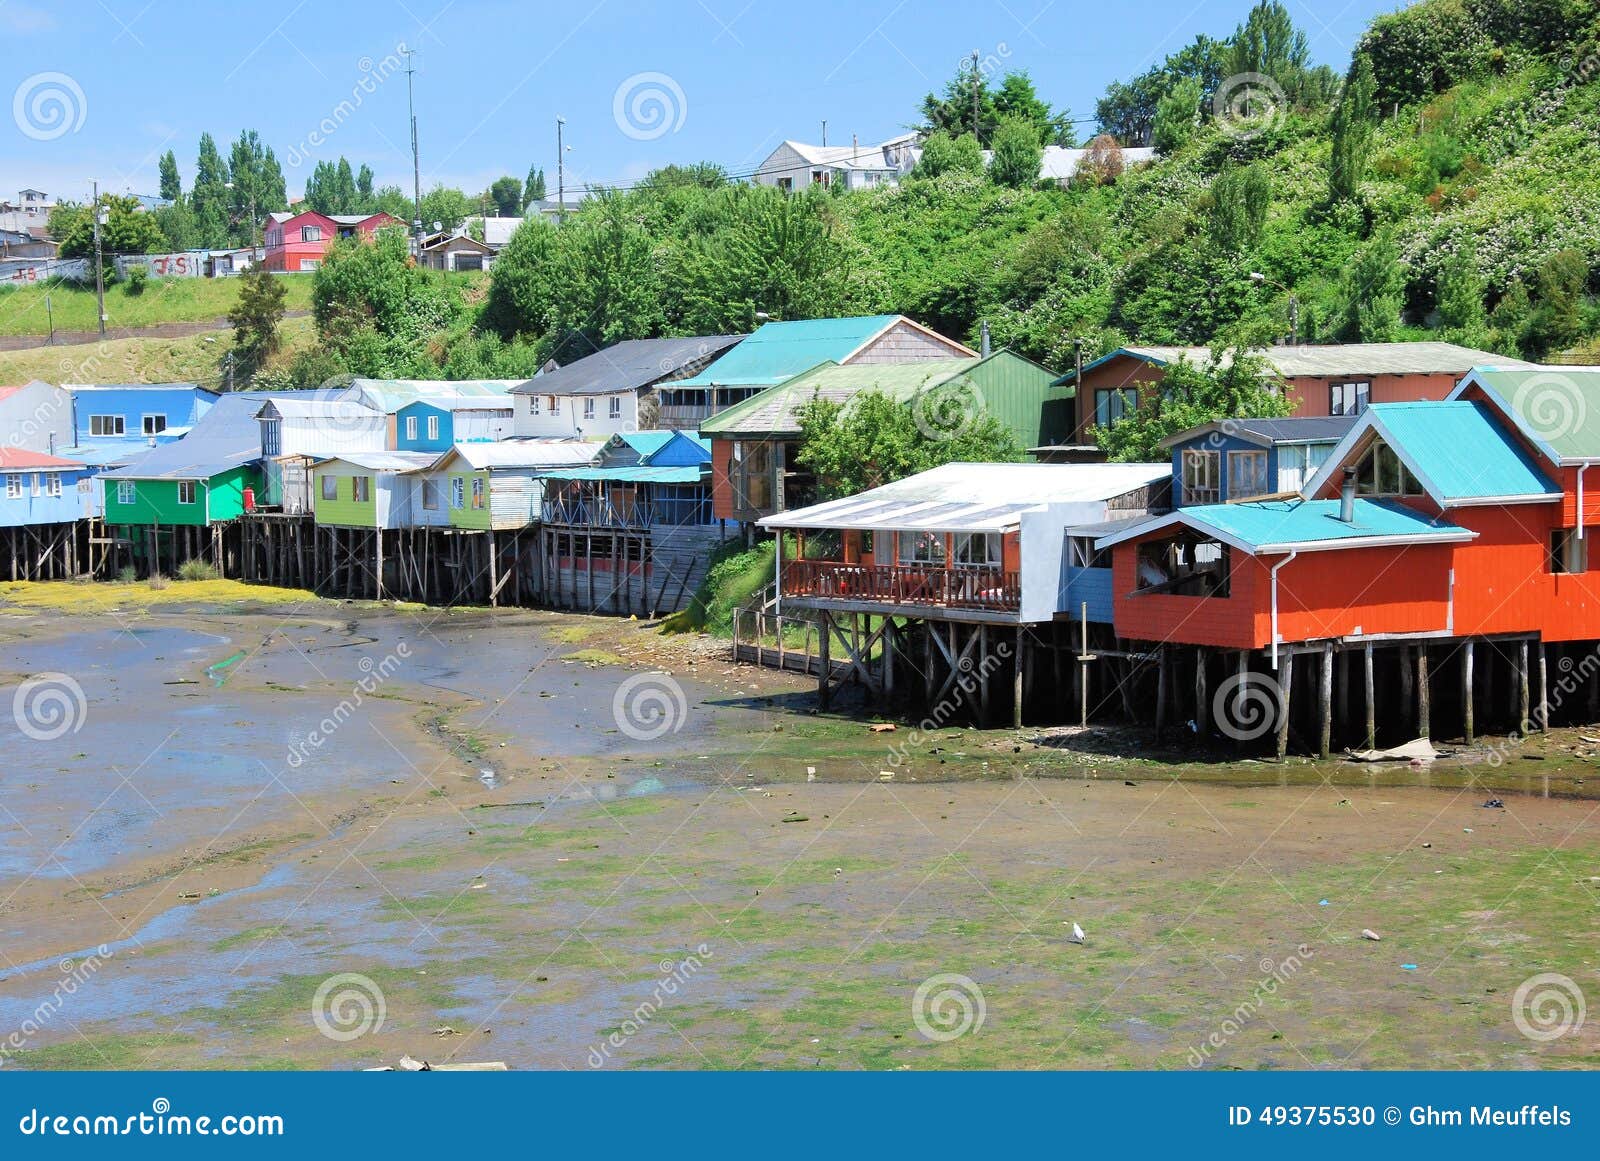 colored stilt houses castro during low tide, chiloe island, chile